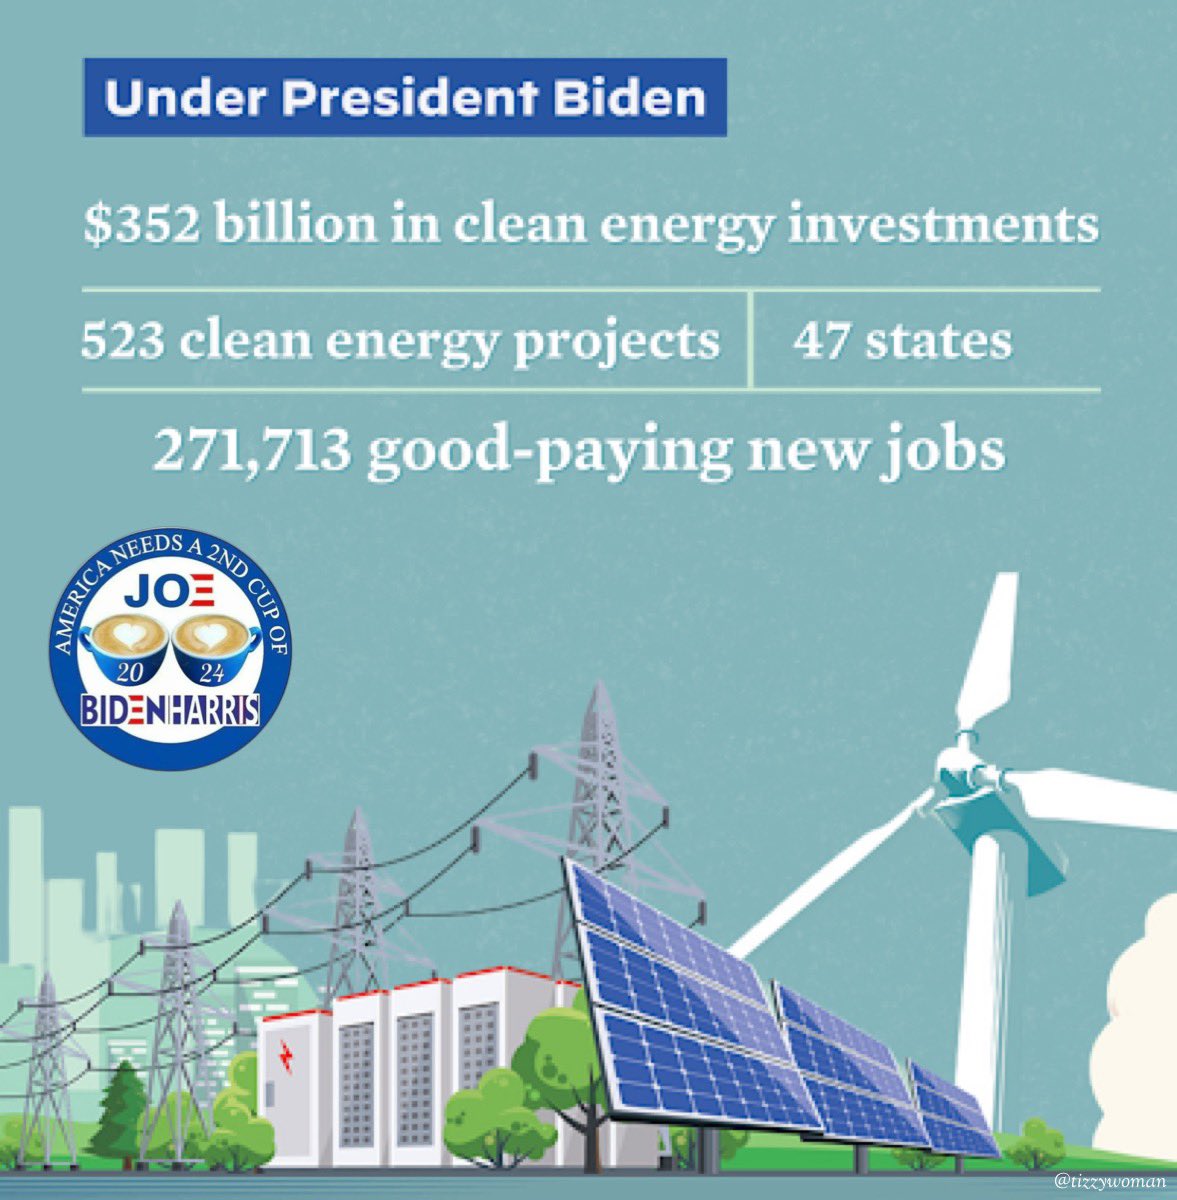 The Biden-Harris administration is funding 523 new clean energy projects across the country. All while creating 271,713 clean energy new jobs, because Democrats deliver for Americans. America needs a 2nd #CupOfJoe! 

#VoteForClimate
#DemCast
#DemsUnited